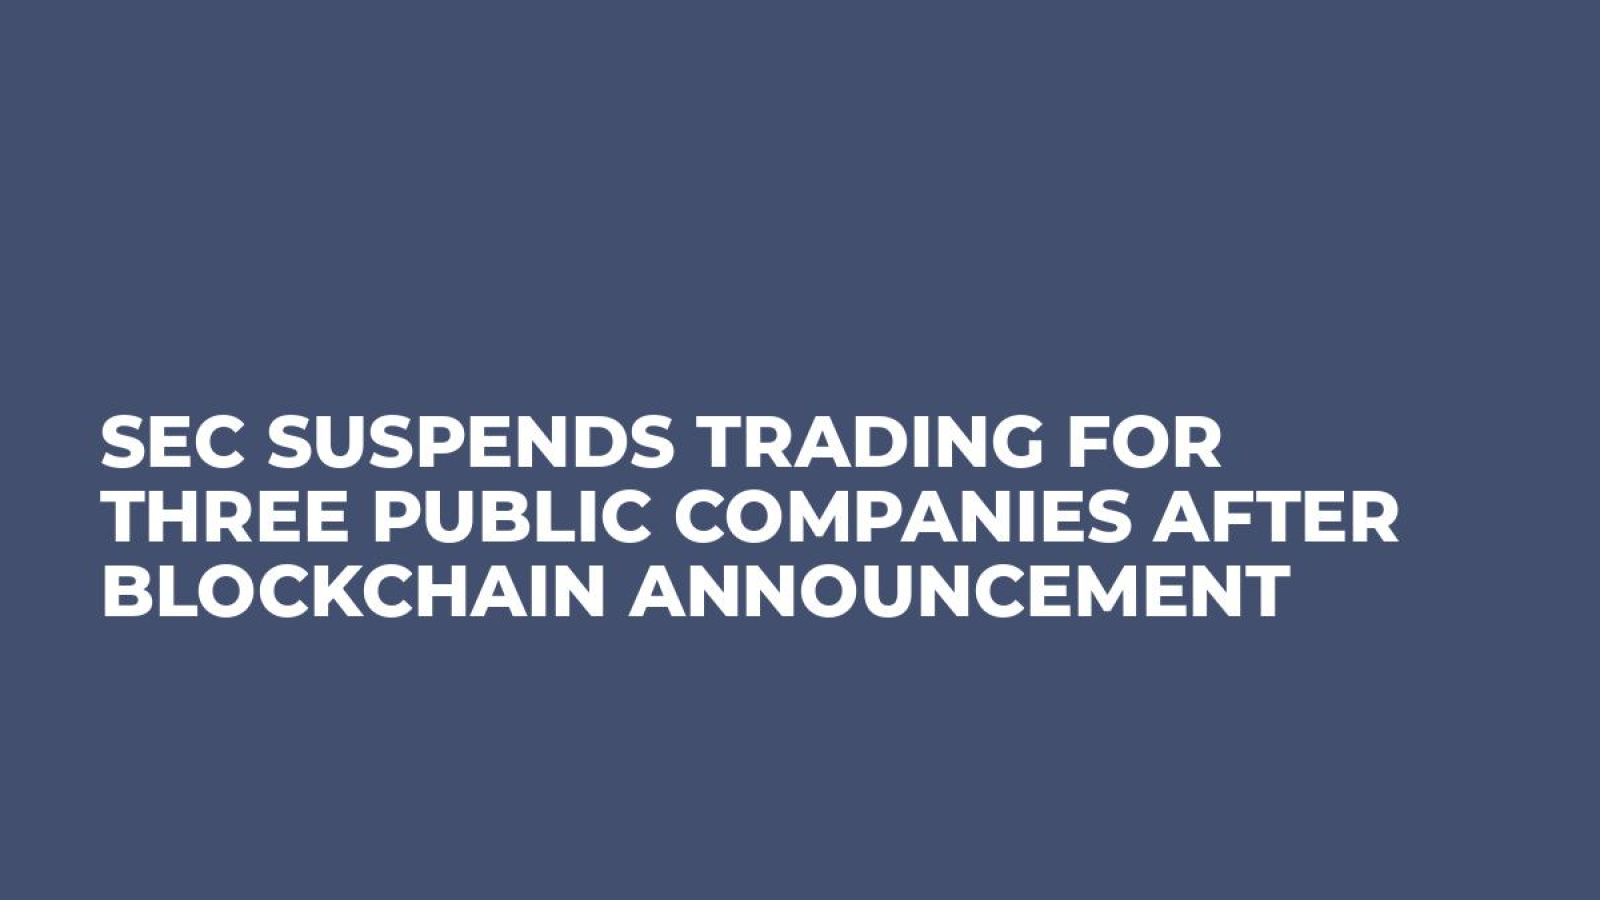 SEC Suspends Trading for Three Public Companies after Blockchain Announcement